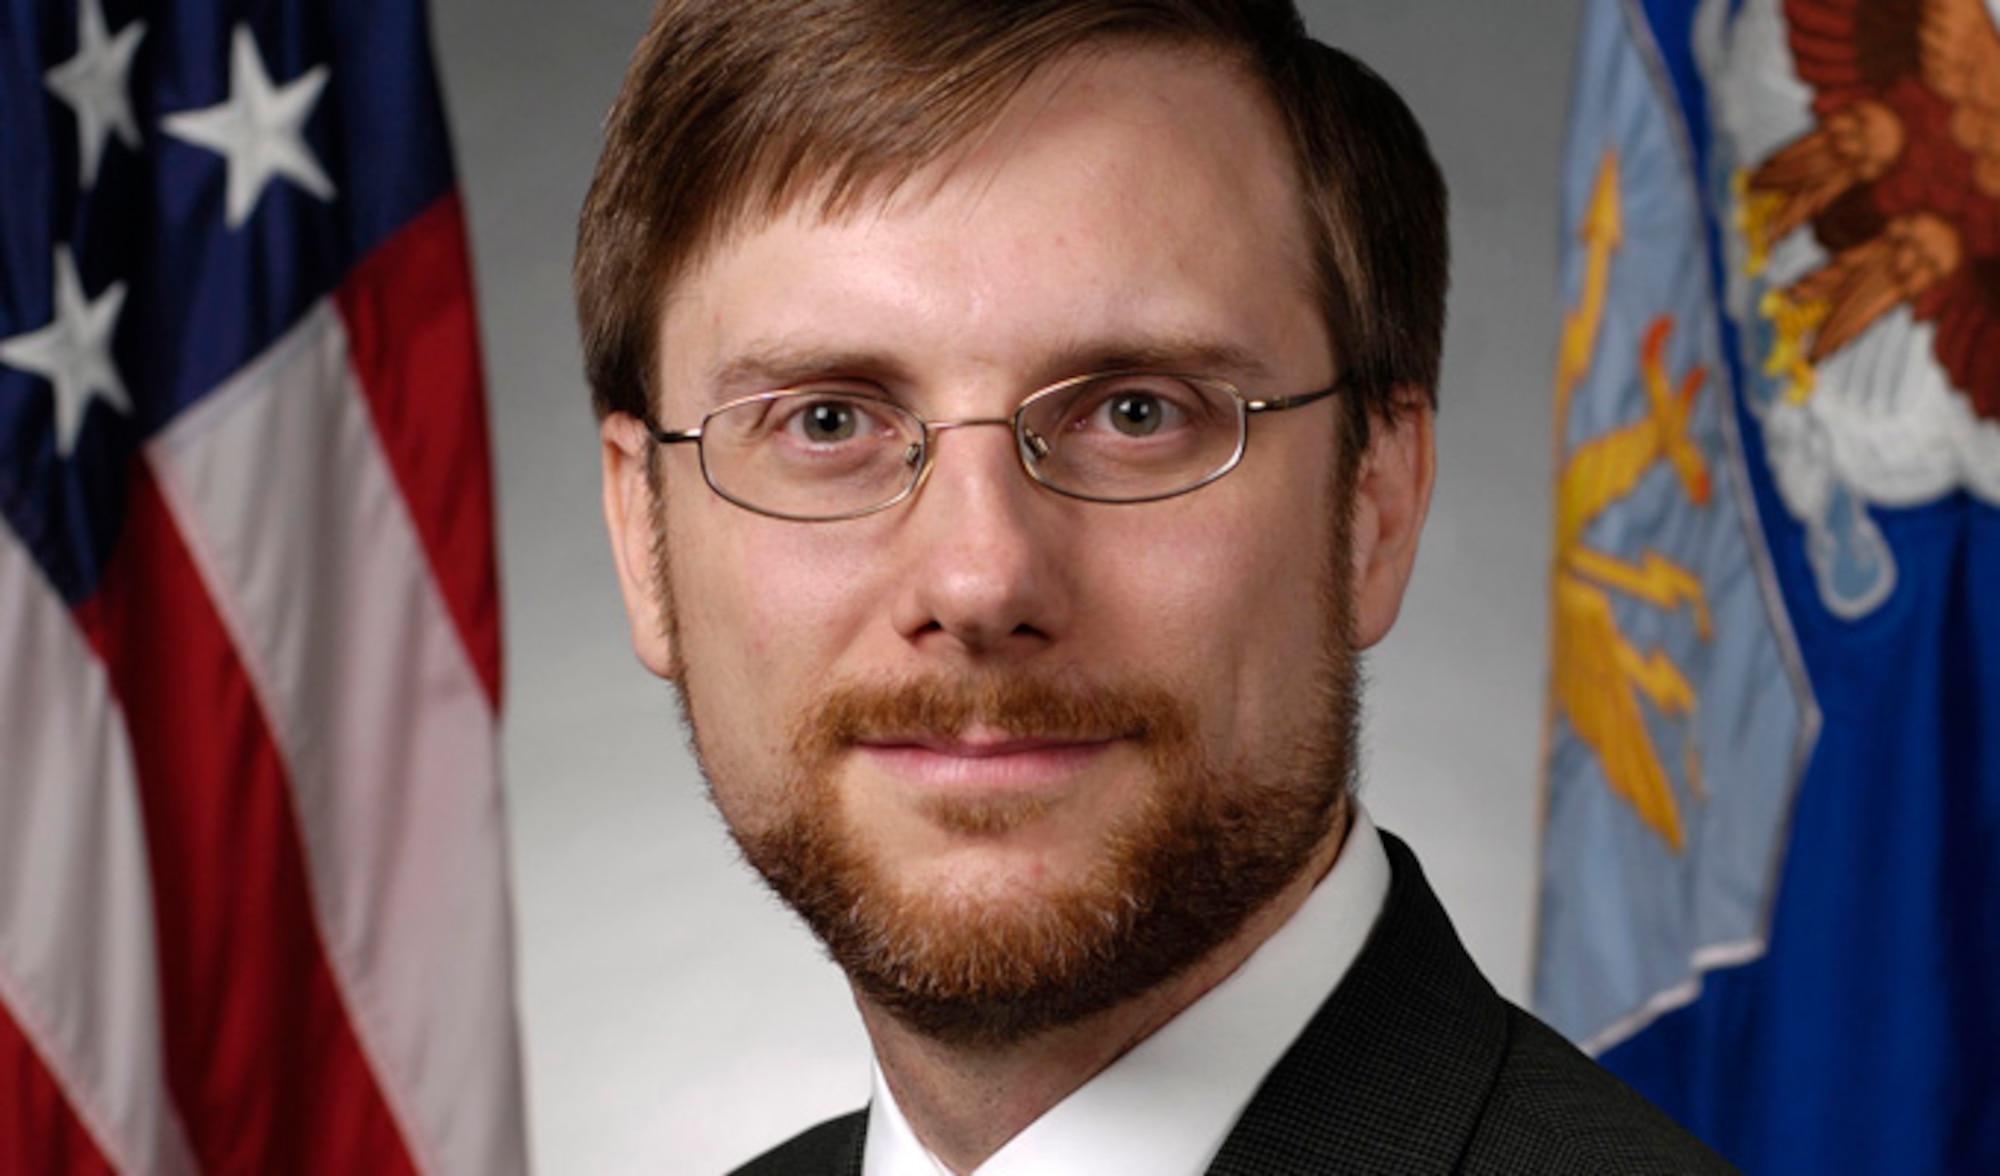 Dr. Jamie Morin, shown here in an official photo, was nominated by the president as the director of cost assessment and program evaluation. If confirmed by the senate, Morin will be the principal staff assistant to the secretary of defense for cost assessment and program evaluation.